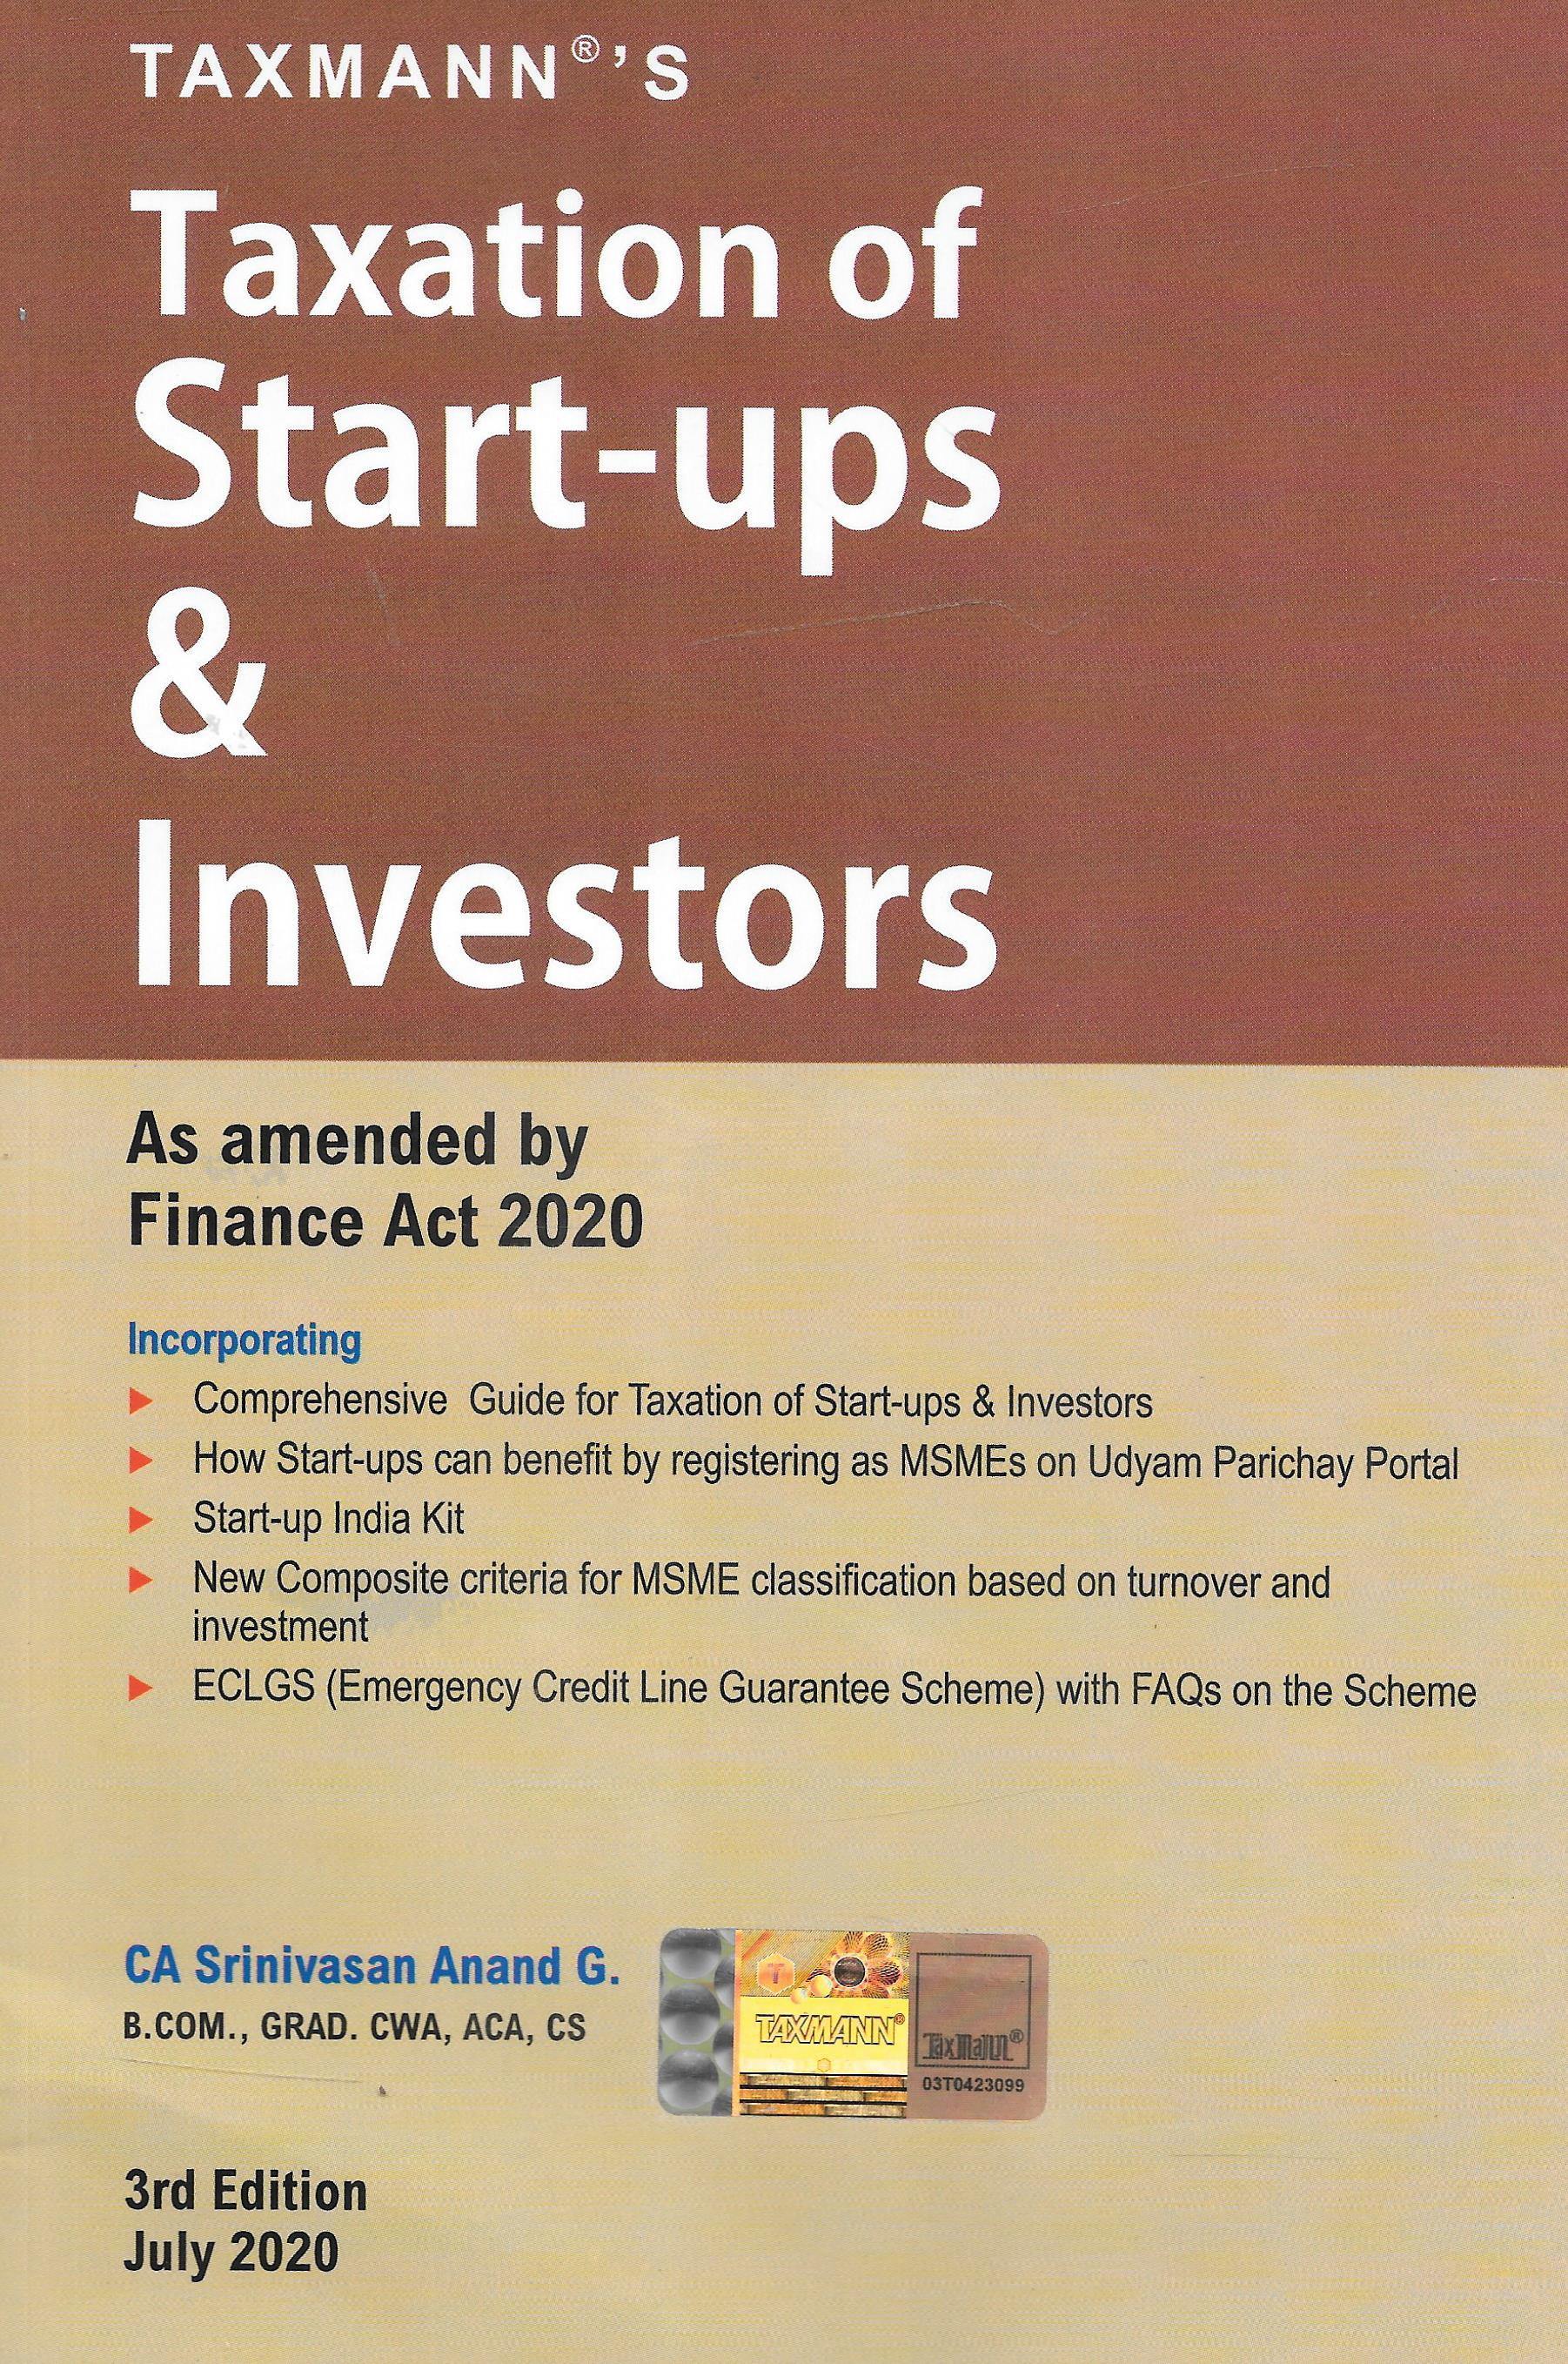 Taxation of Start-Ups & Investors as amended by Finance Act 2020